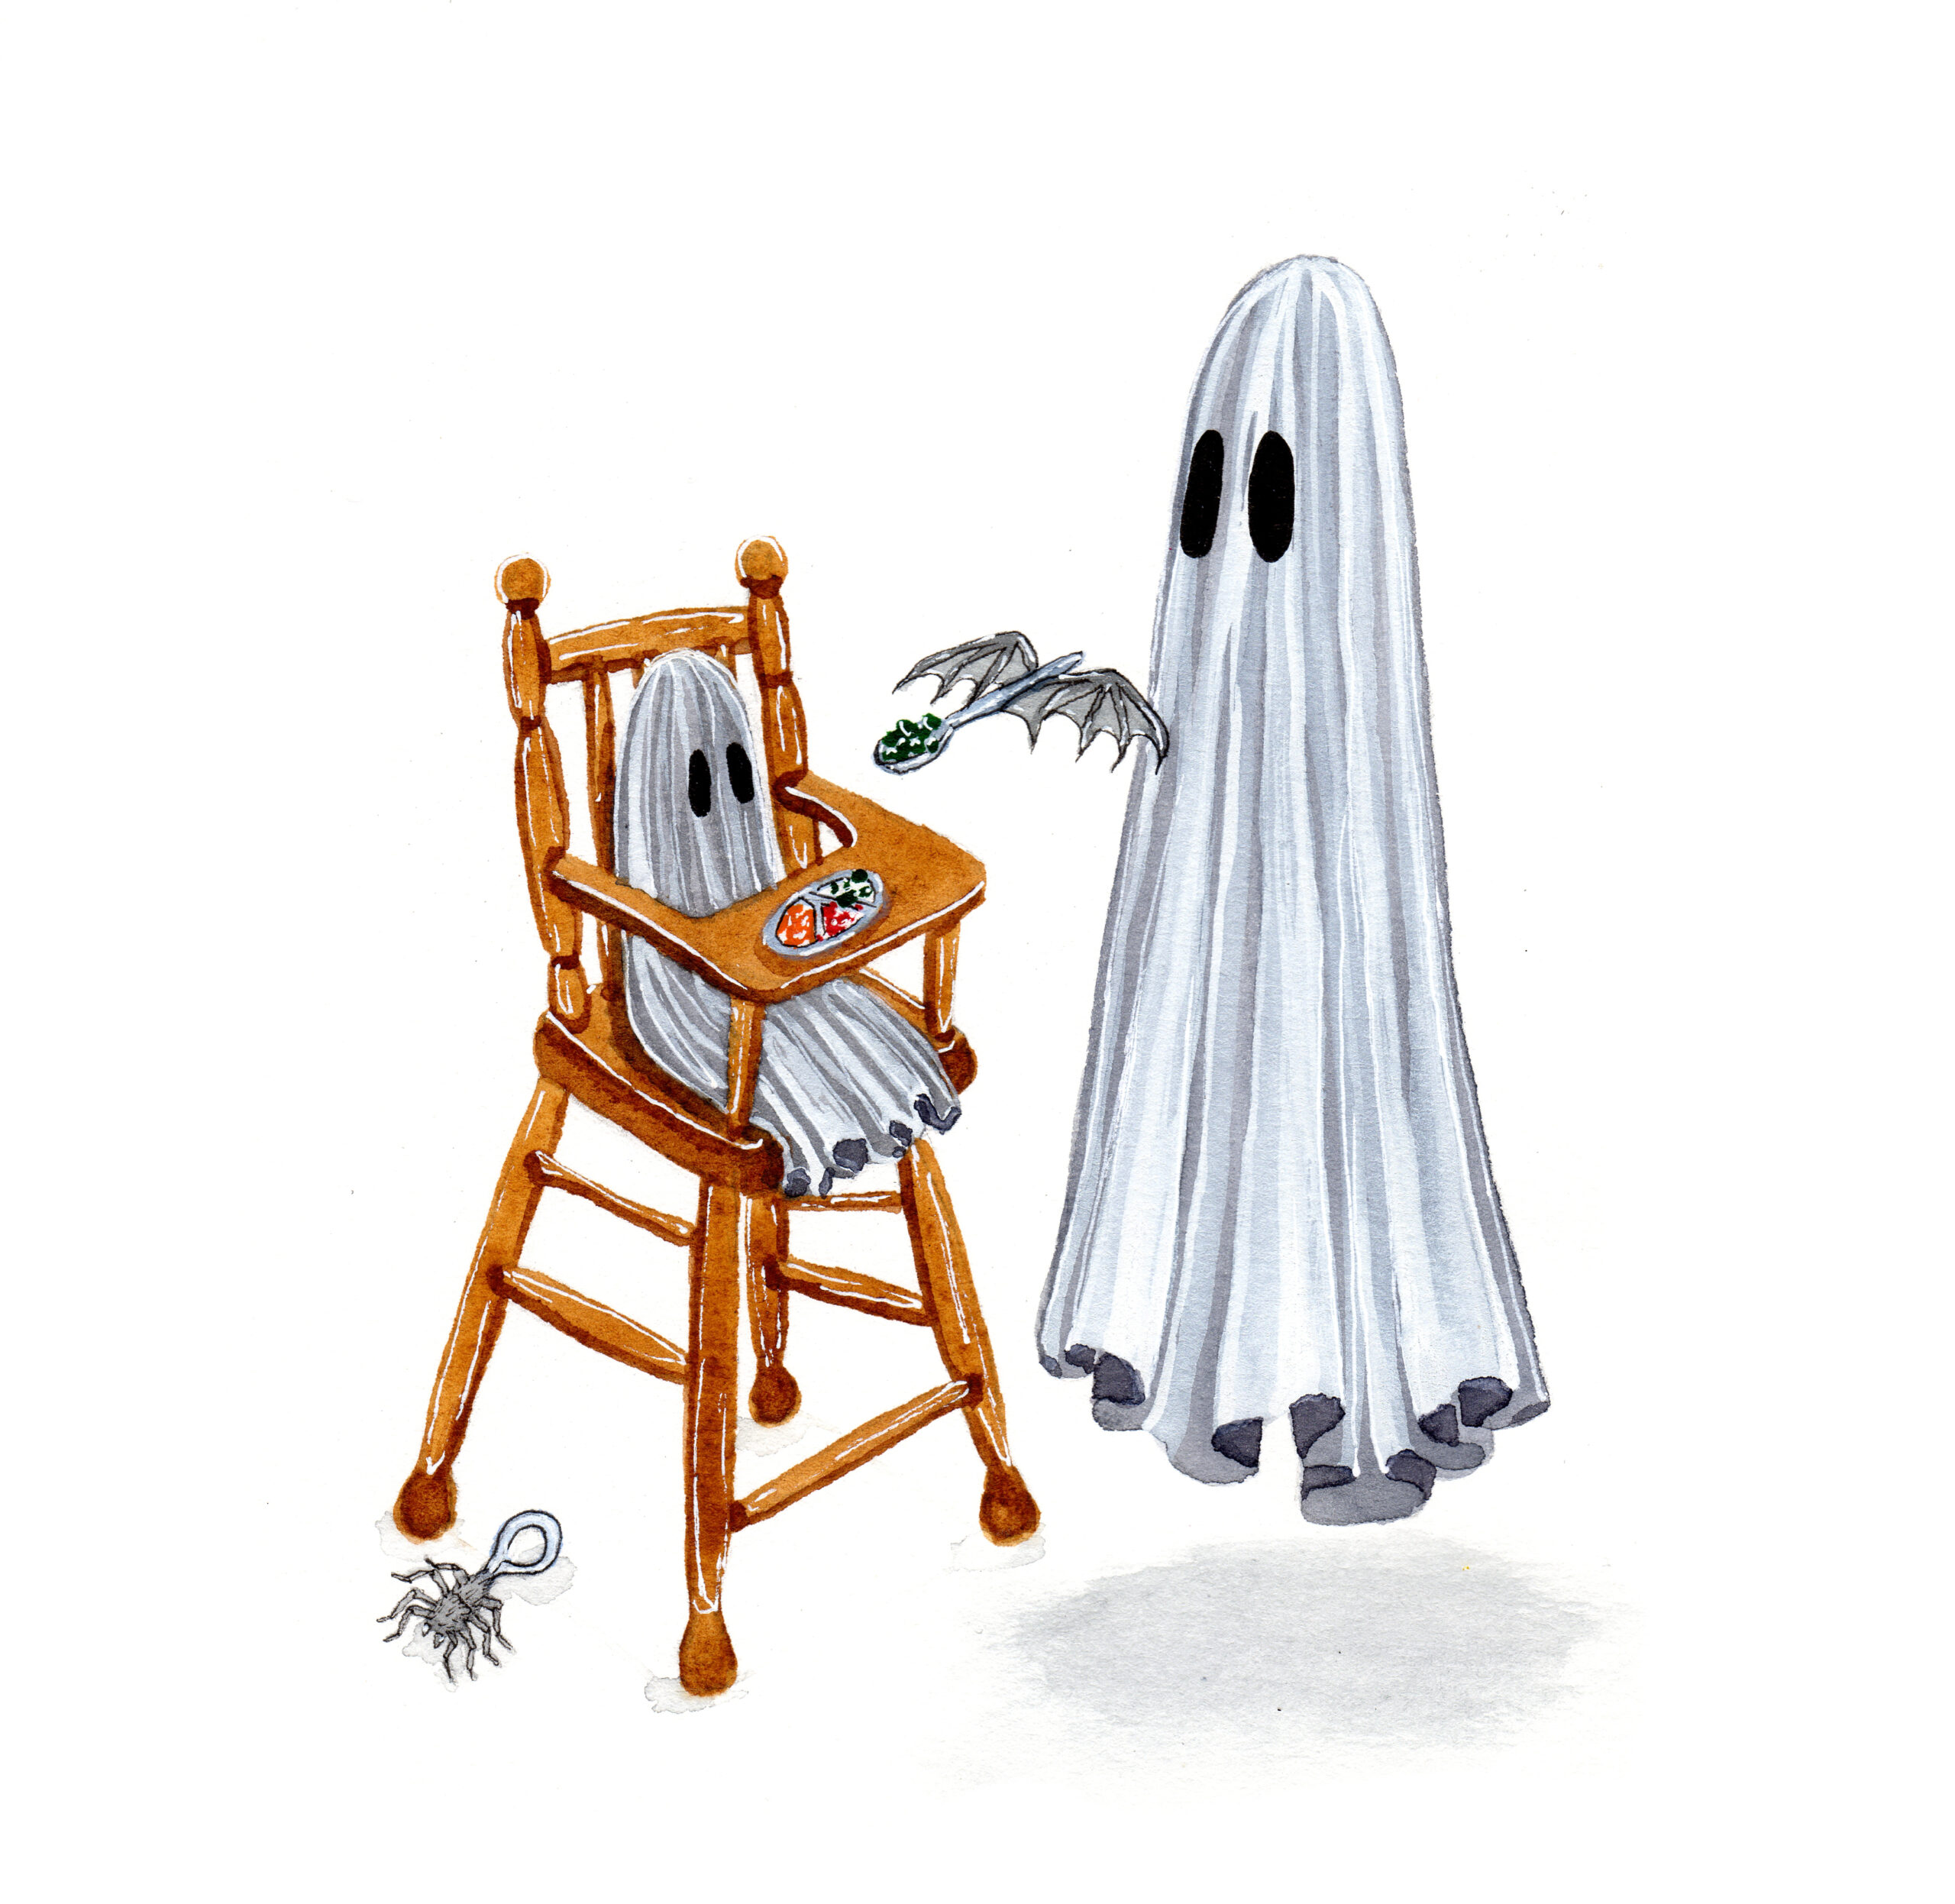 A ghost feeds its child whom is sitting in a high chair.